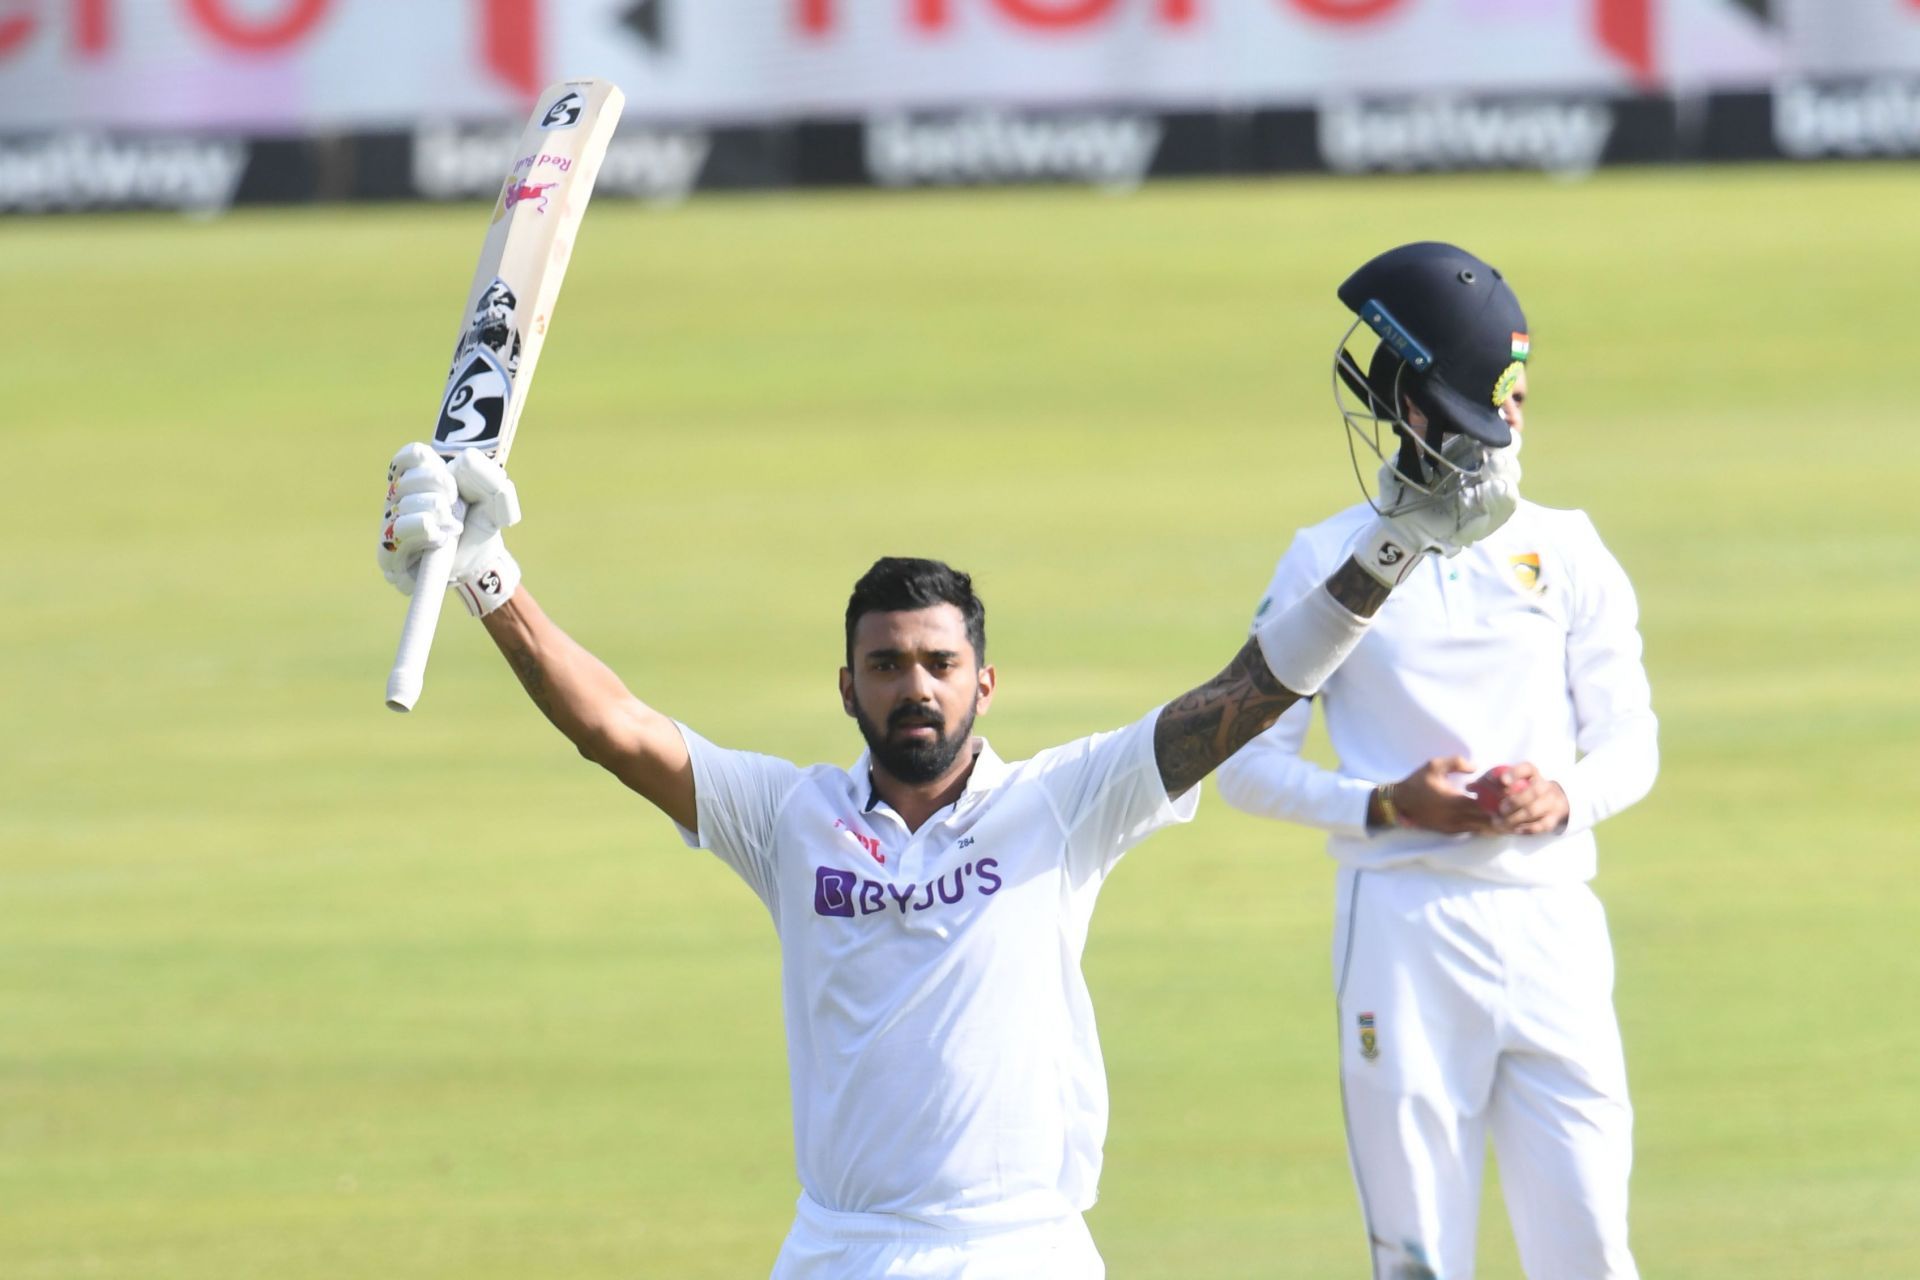 KL Rahul has excelled at the top of the order since the away Test series against England